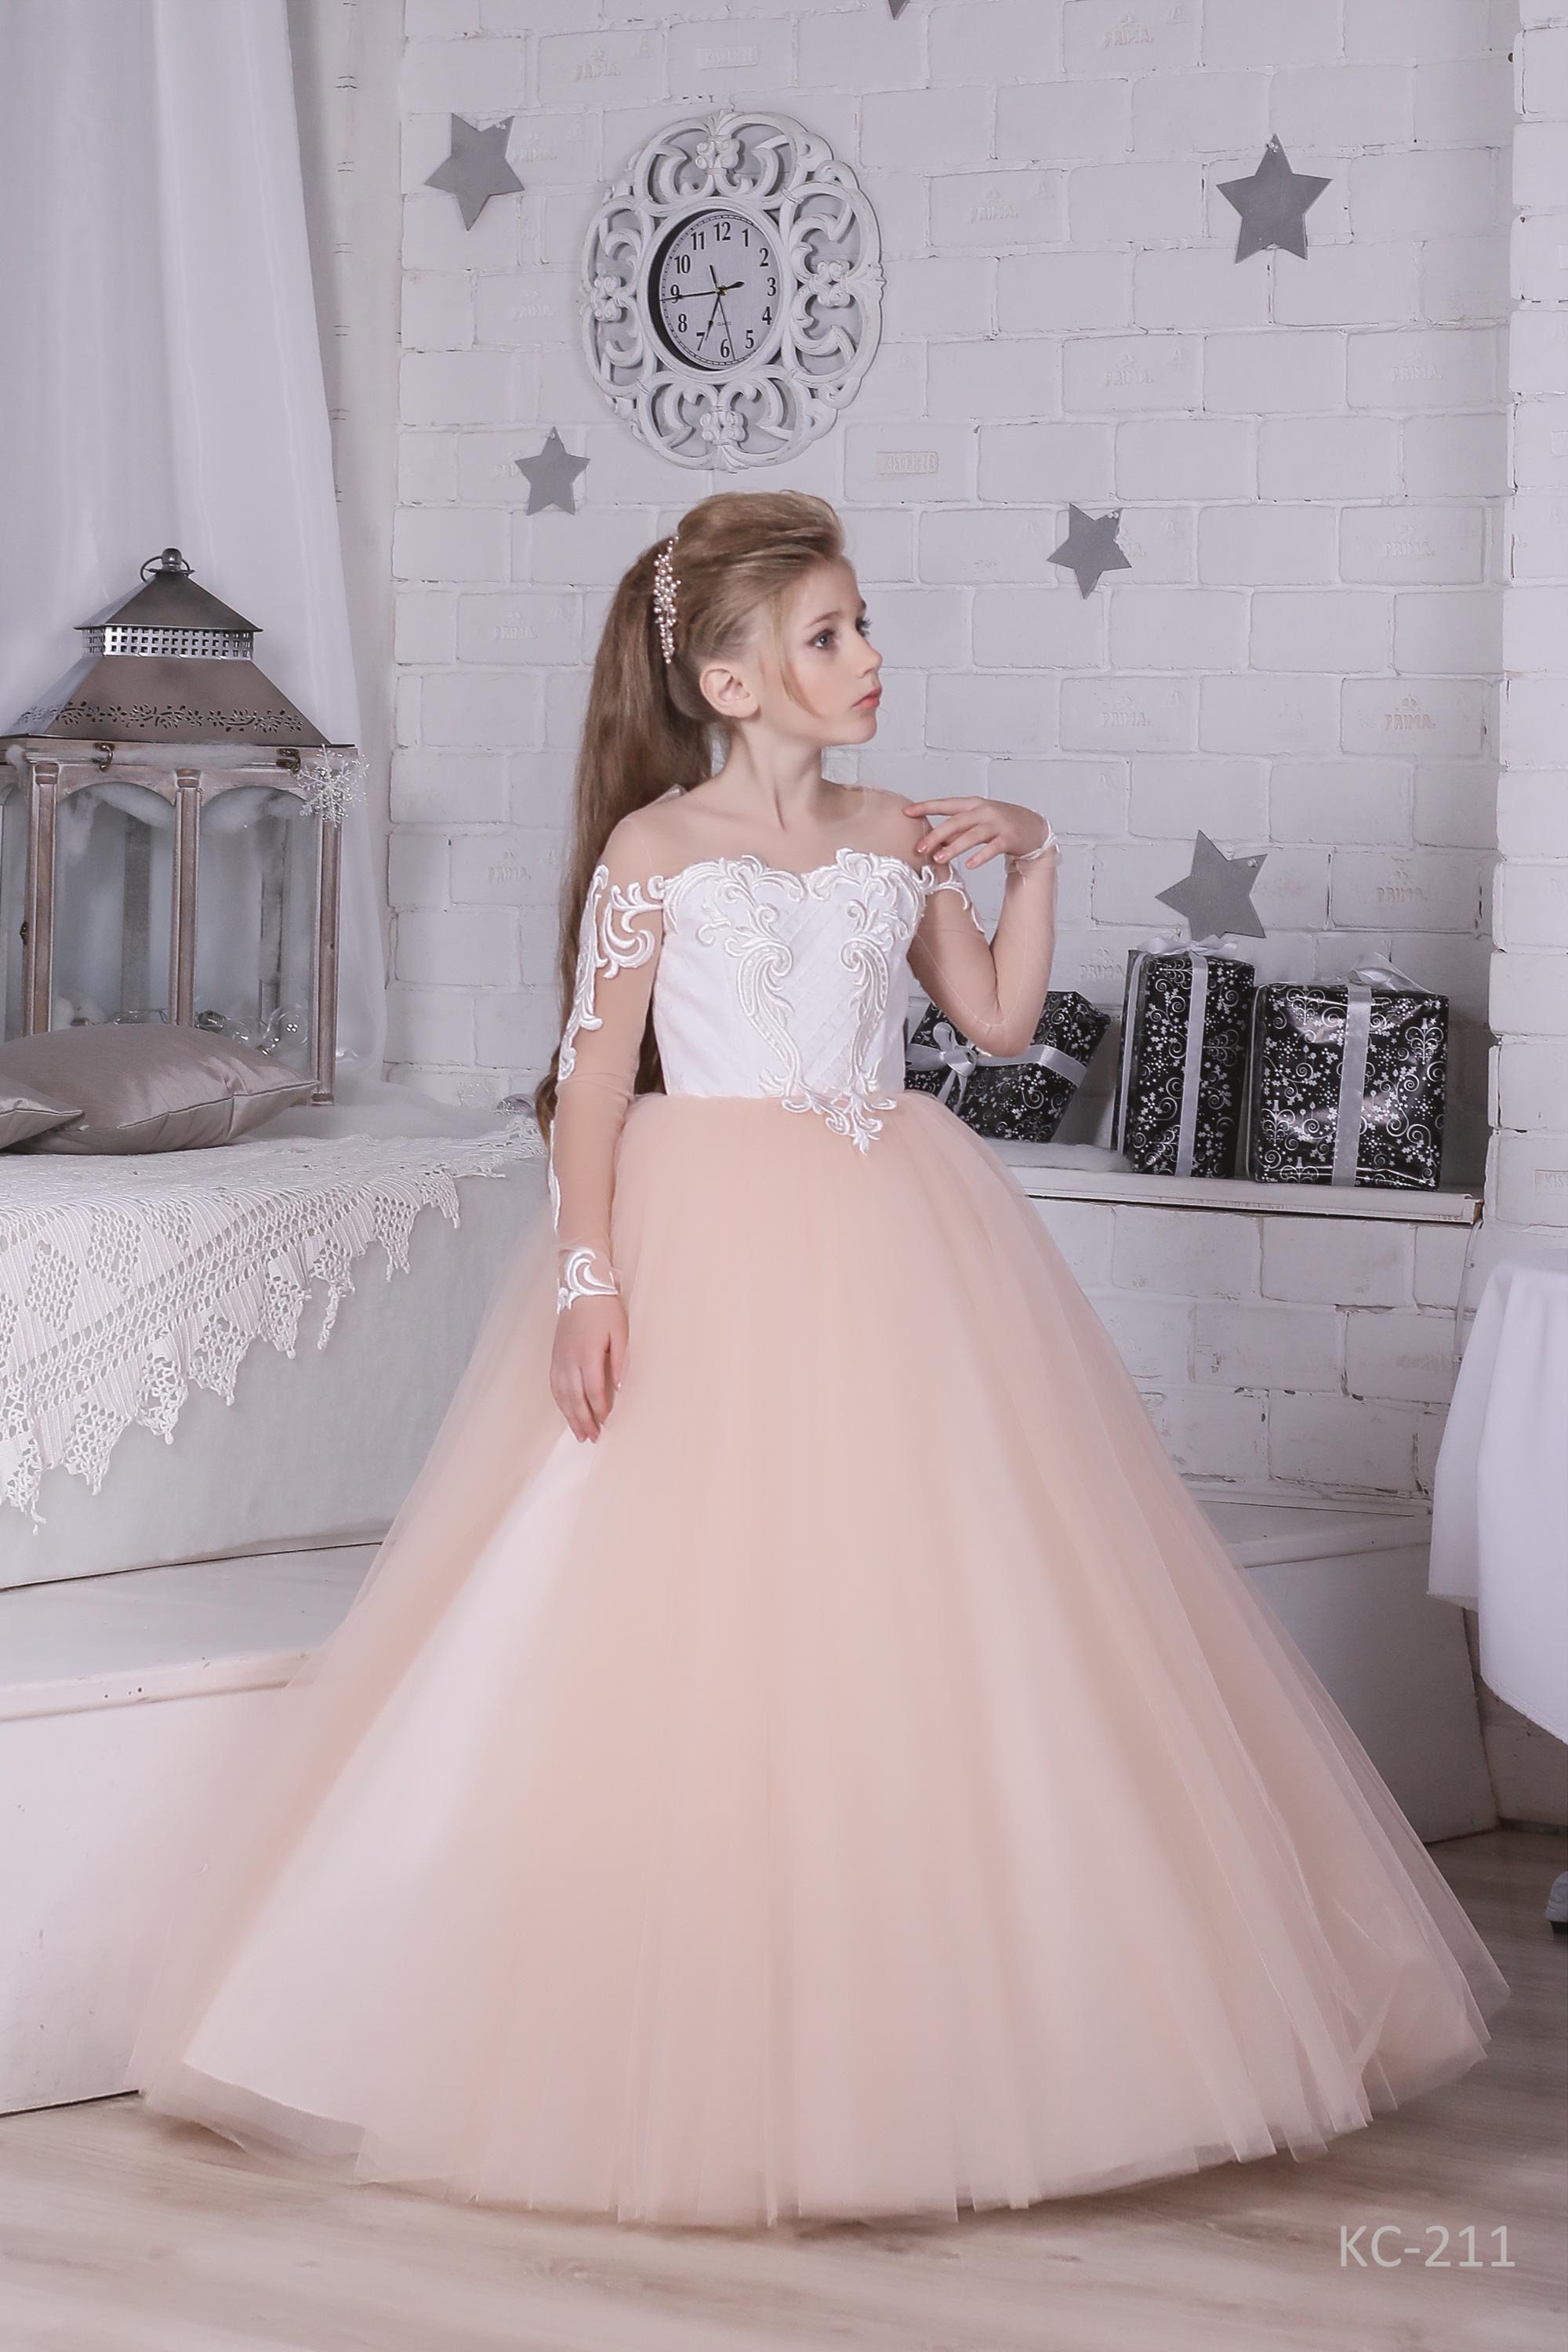 Long Prom Dresses For 13 Year Olds - UCenter Dress